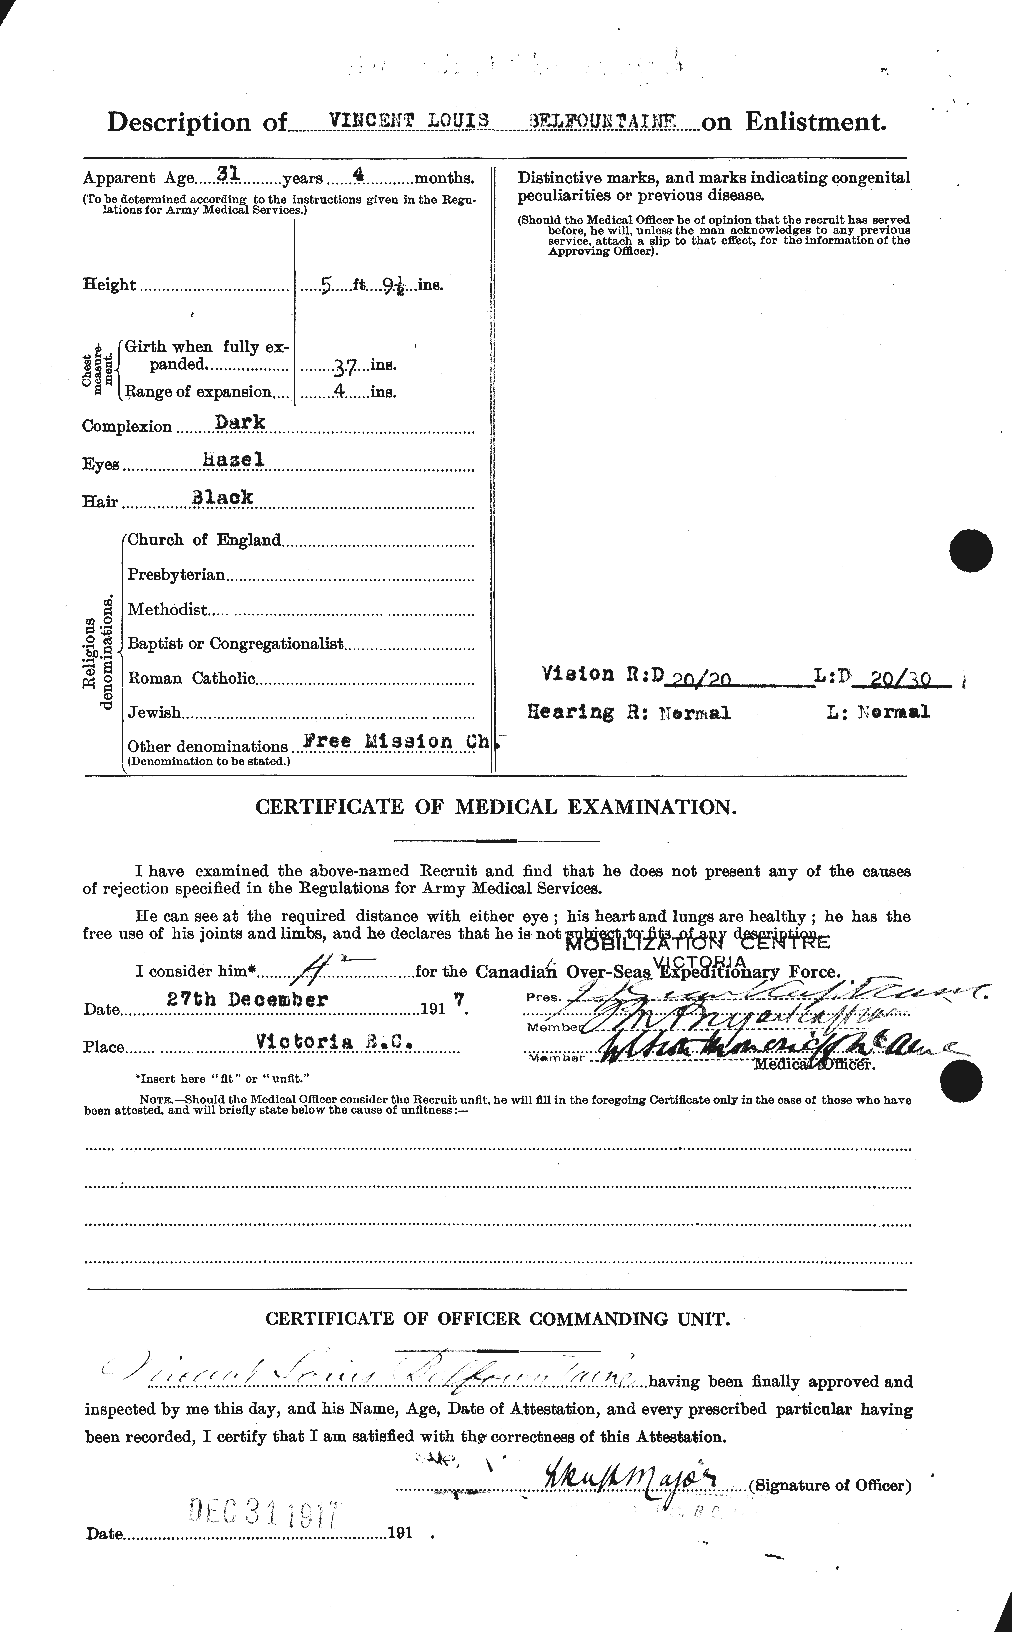 Personnel Records of the First World War - CEF 232457b